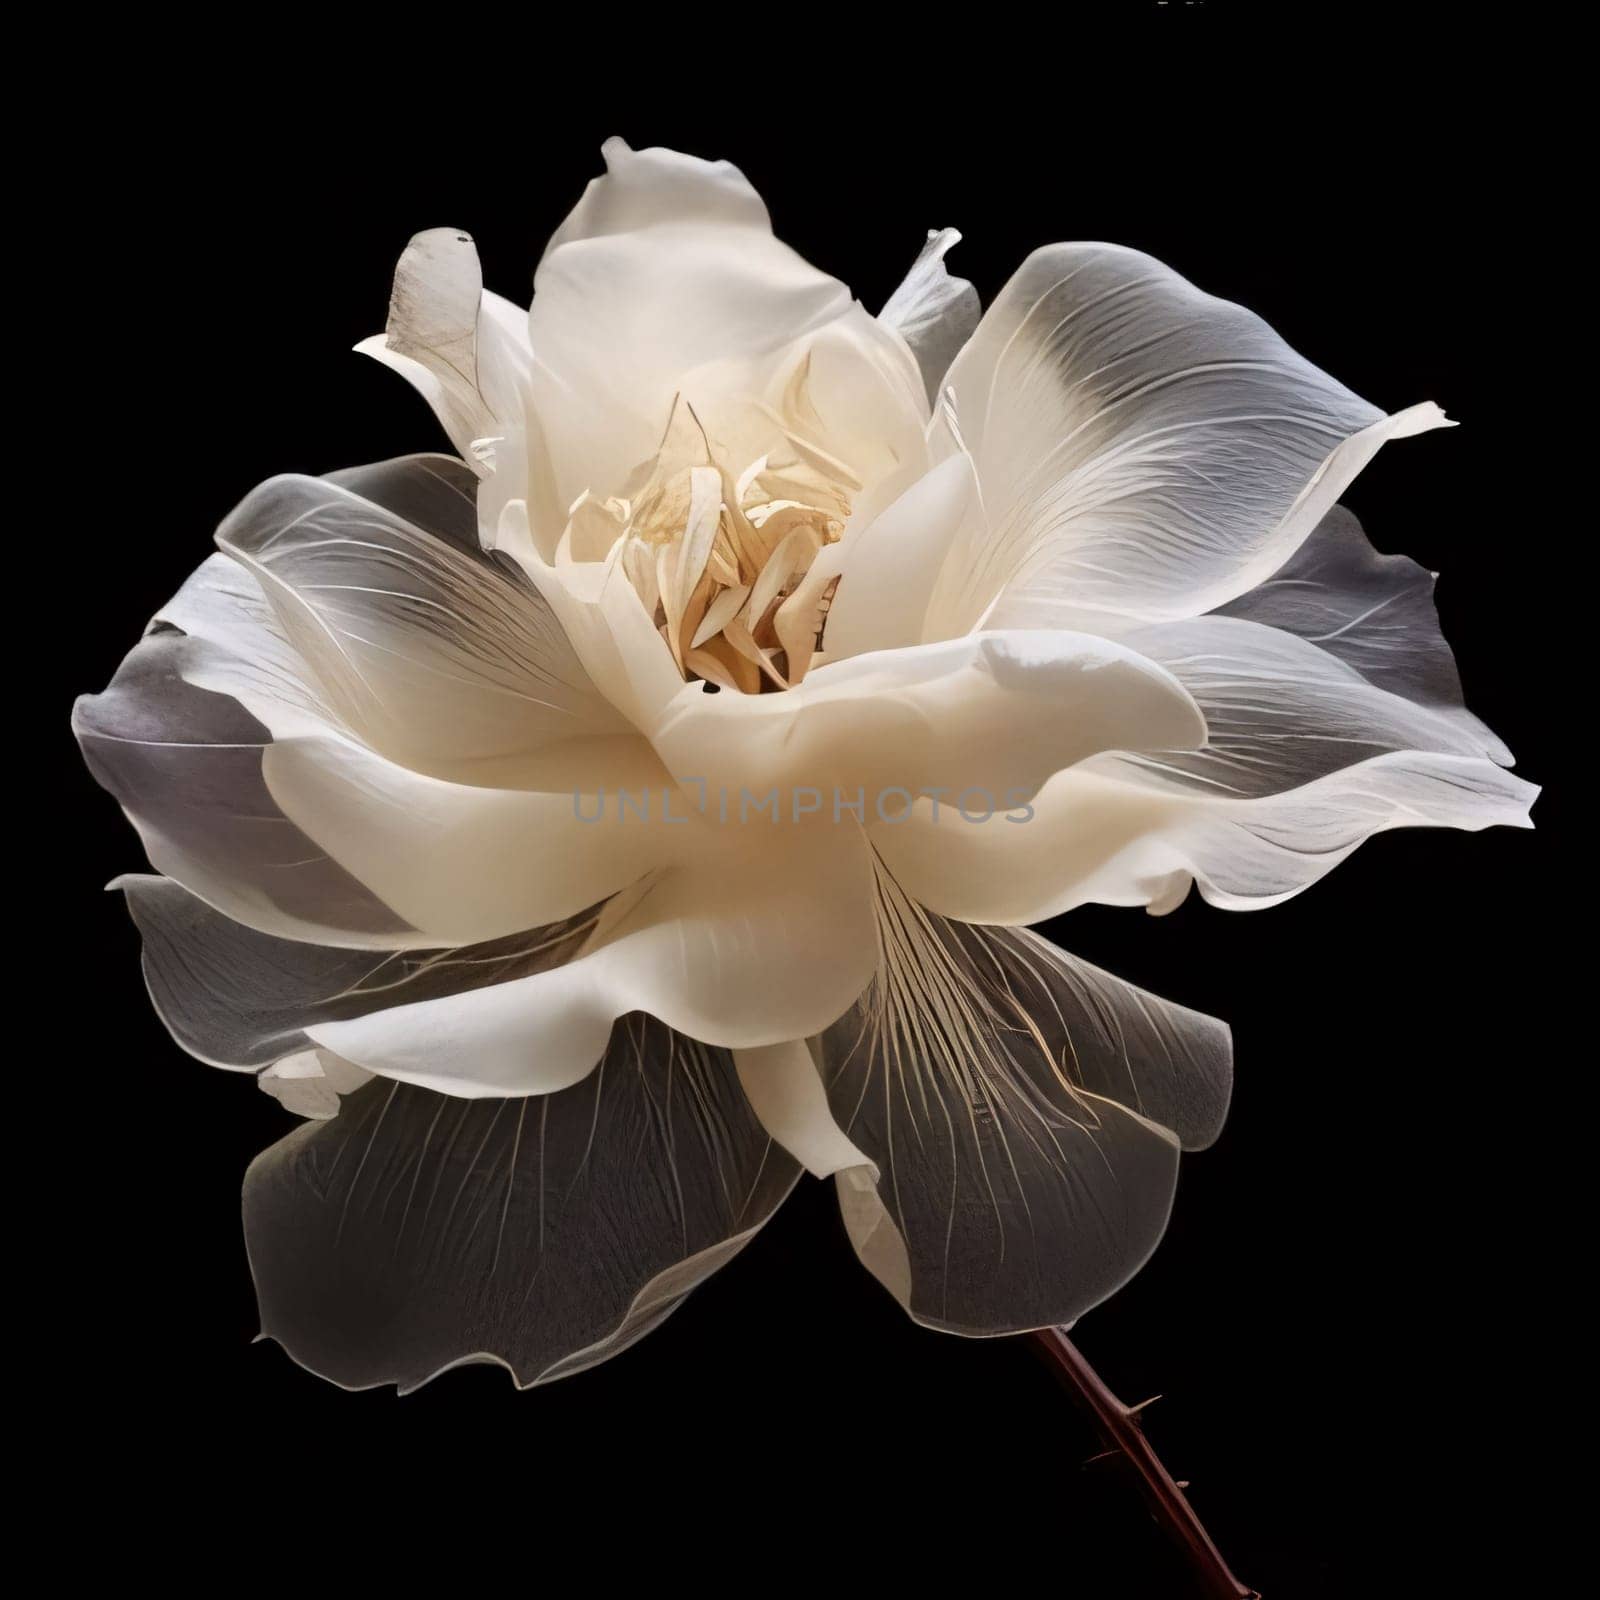 White magnolia flower isolated on black background. Flowering flowers, a symbol of spring, new life. A joyful time of nature waking up to life.